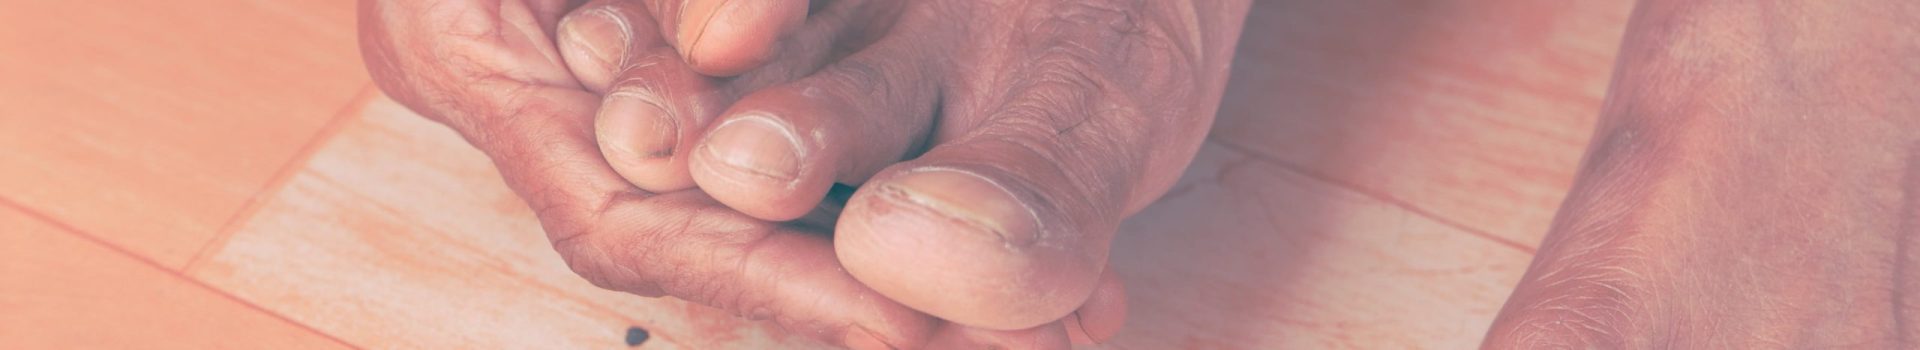 Ensuring Proper Toenail Care for Seniors: Options and Services